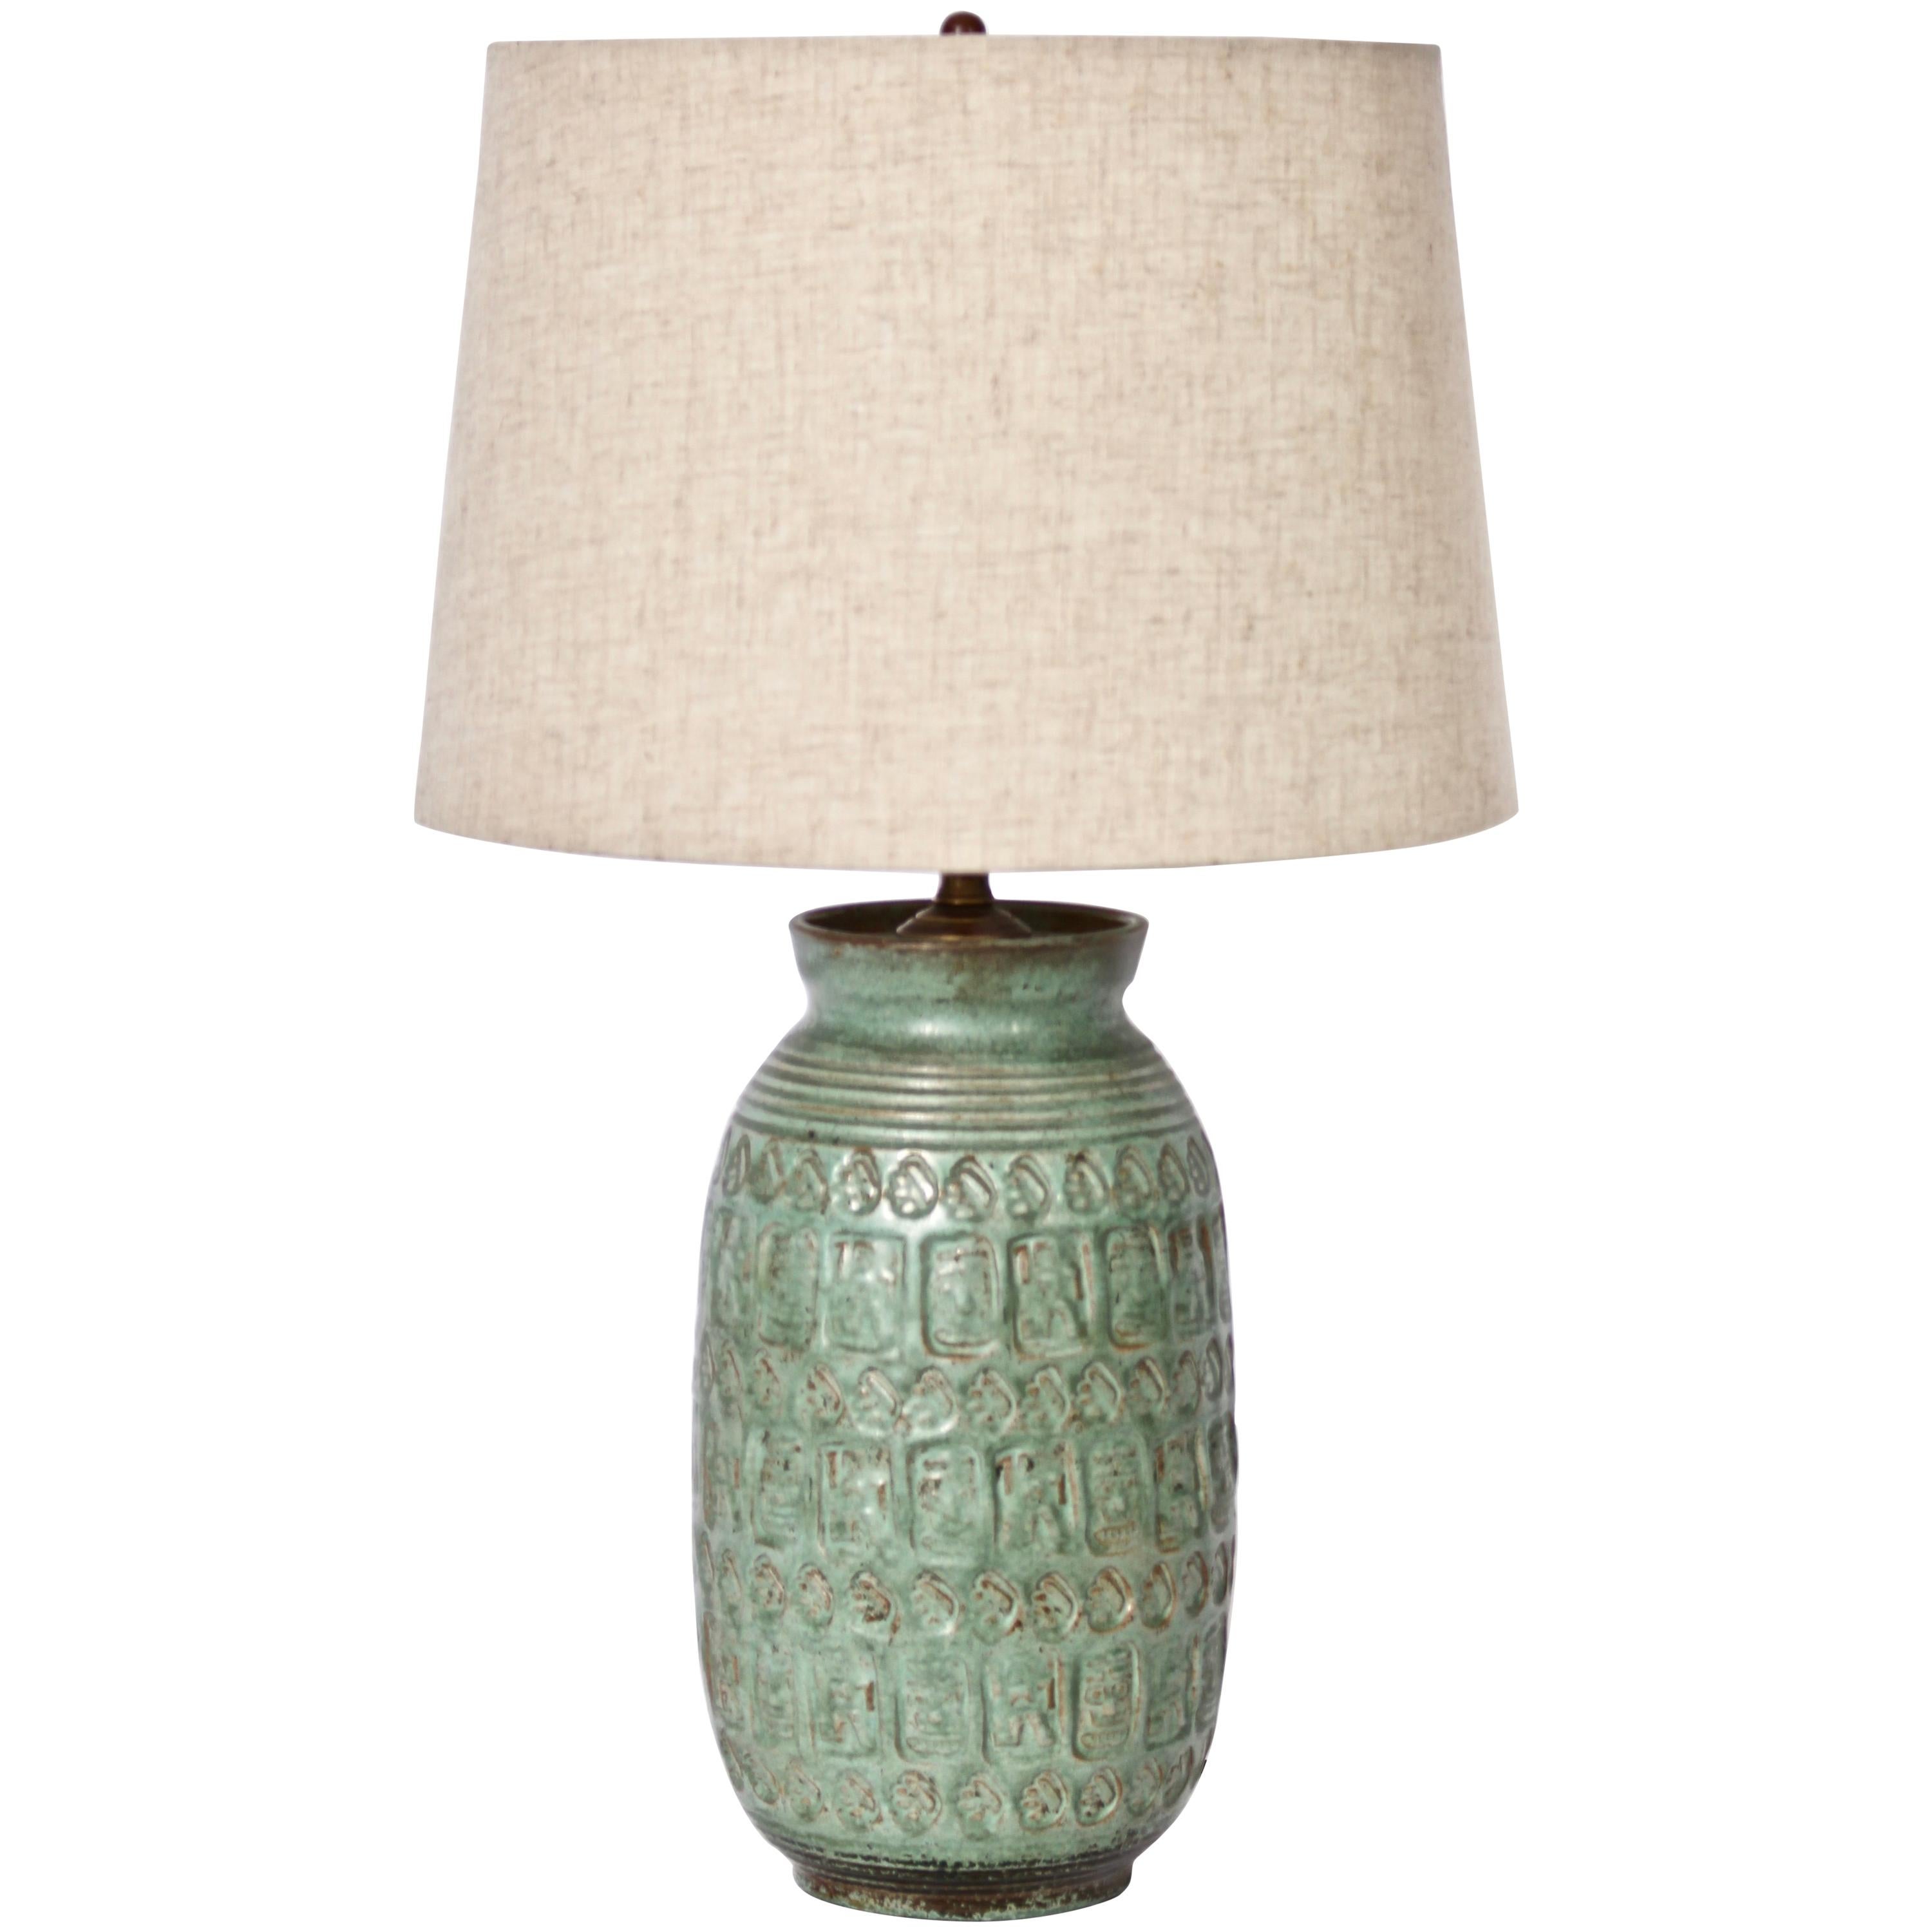 American Midcentury Hand Imprinted Art Pottery Table Lamp in Celadon, circa 1960